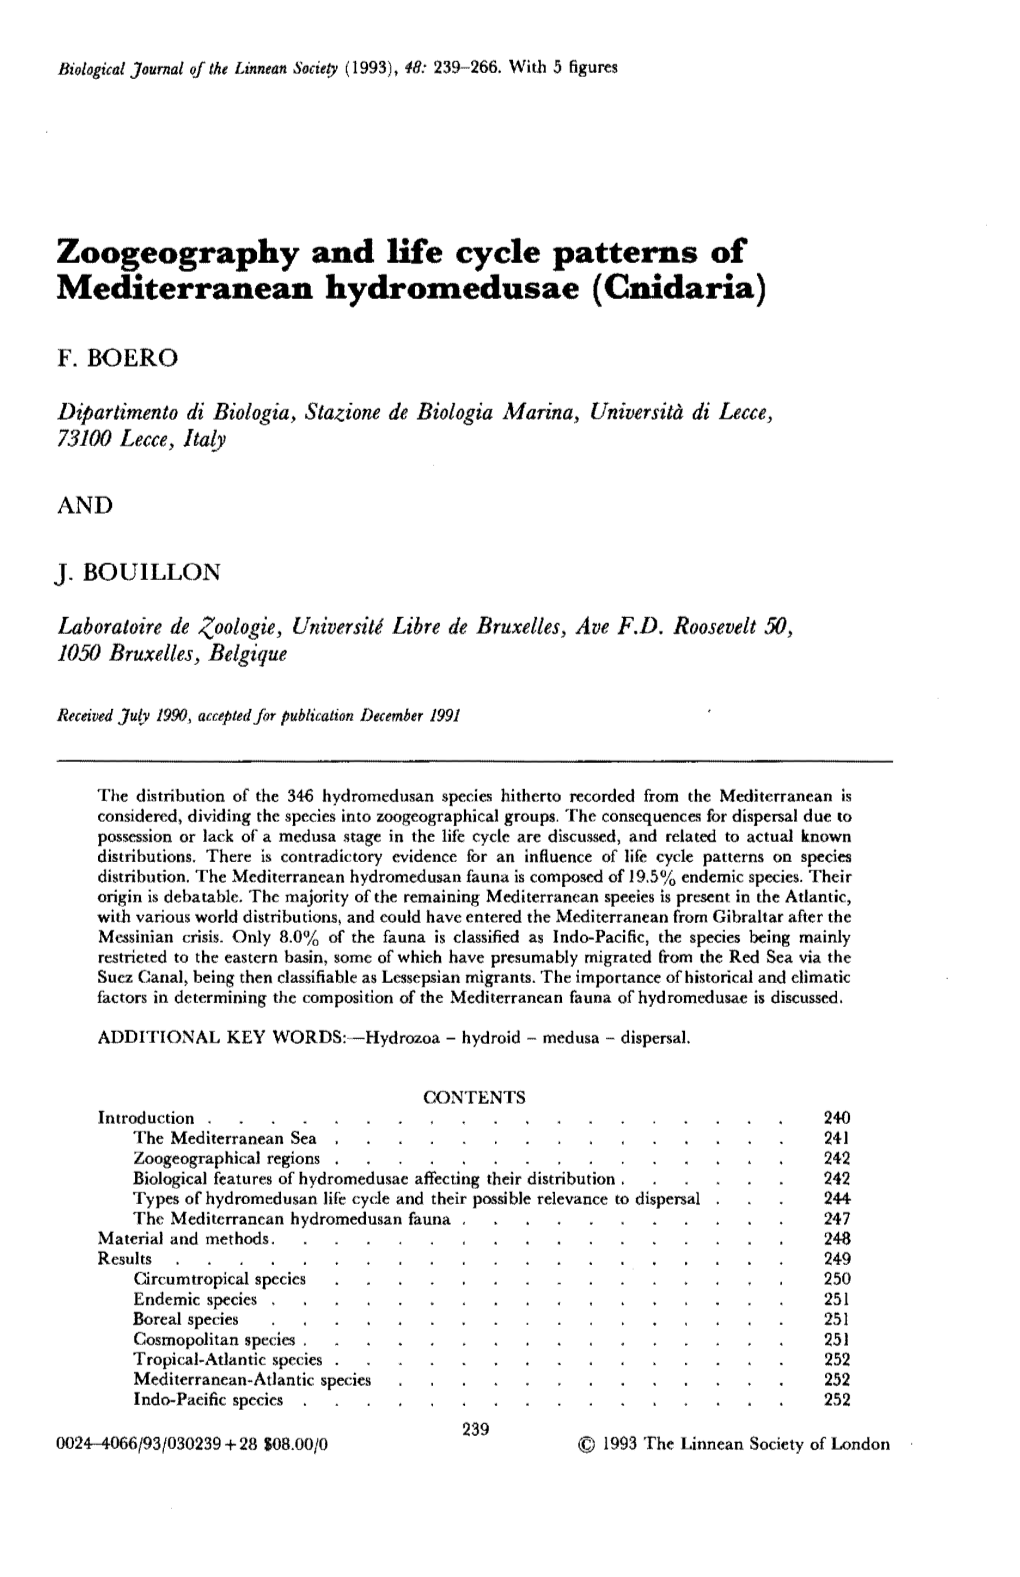 Zoogeography and Life Cycle Patterns of Mediterranean Hydromedusae (Cnidaria)